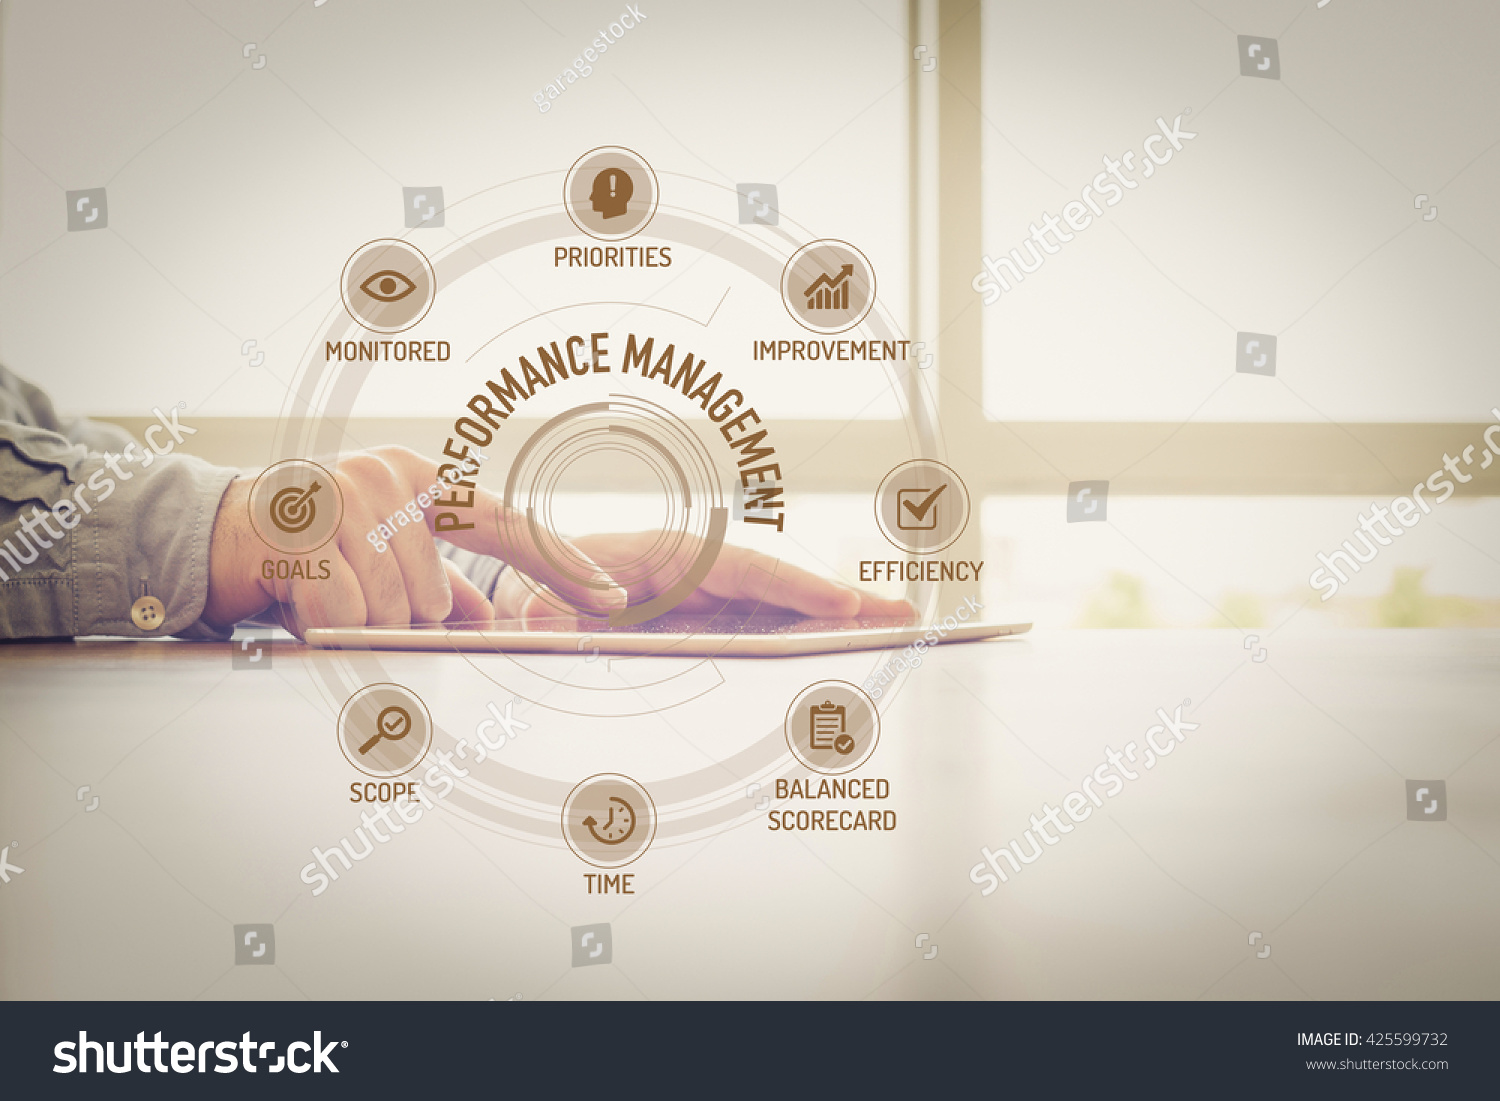 PERFORMANCE MANAGEMENT chart with keywords and icons on screen #425599732